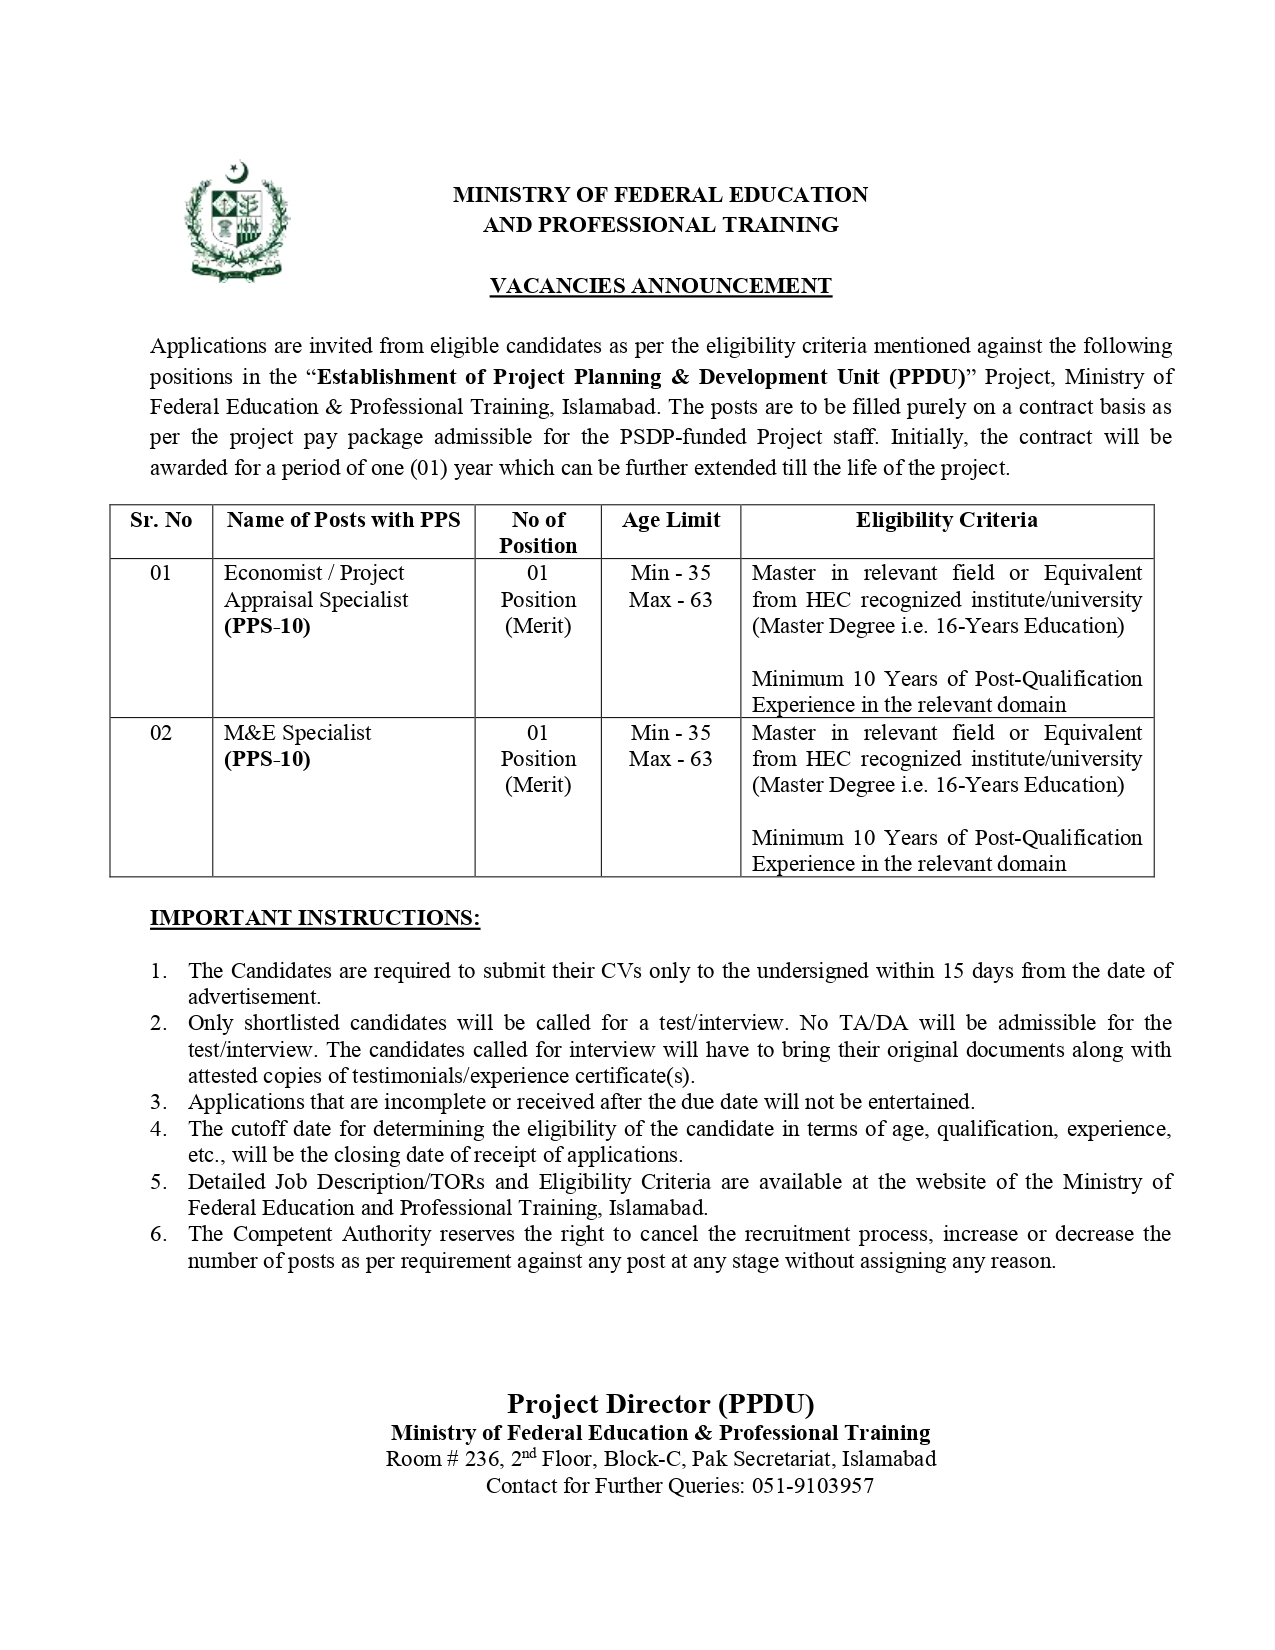 Ministry of Federal Education and Training Jobs 